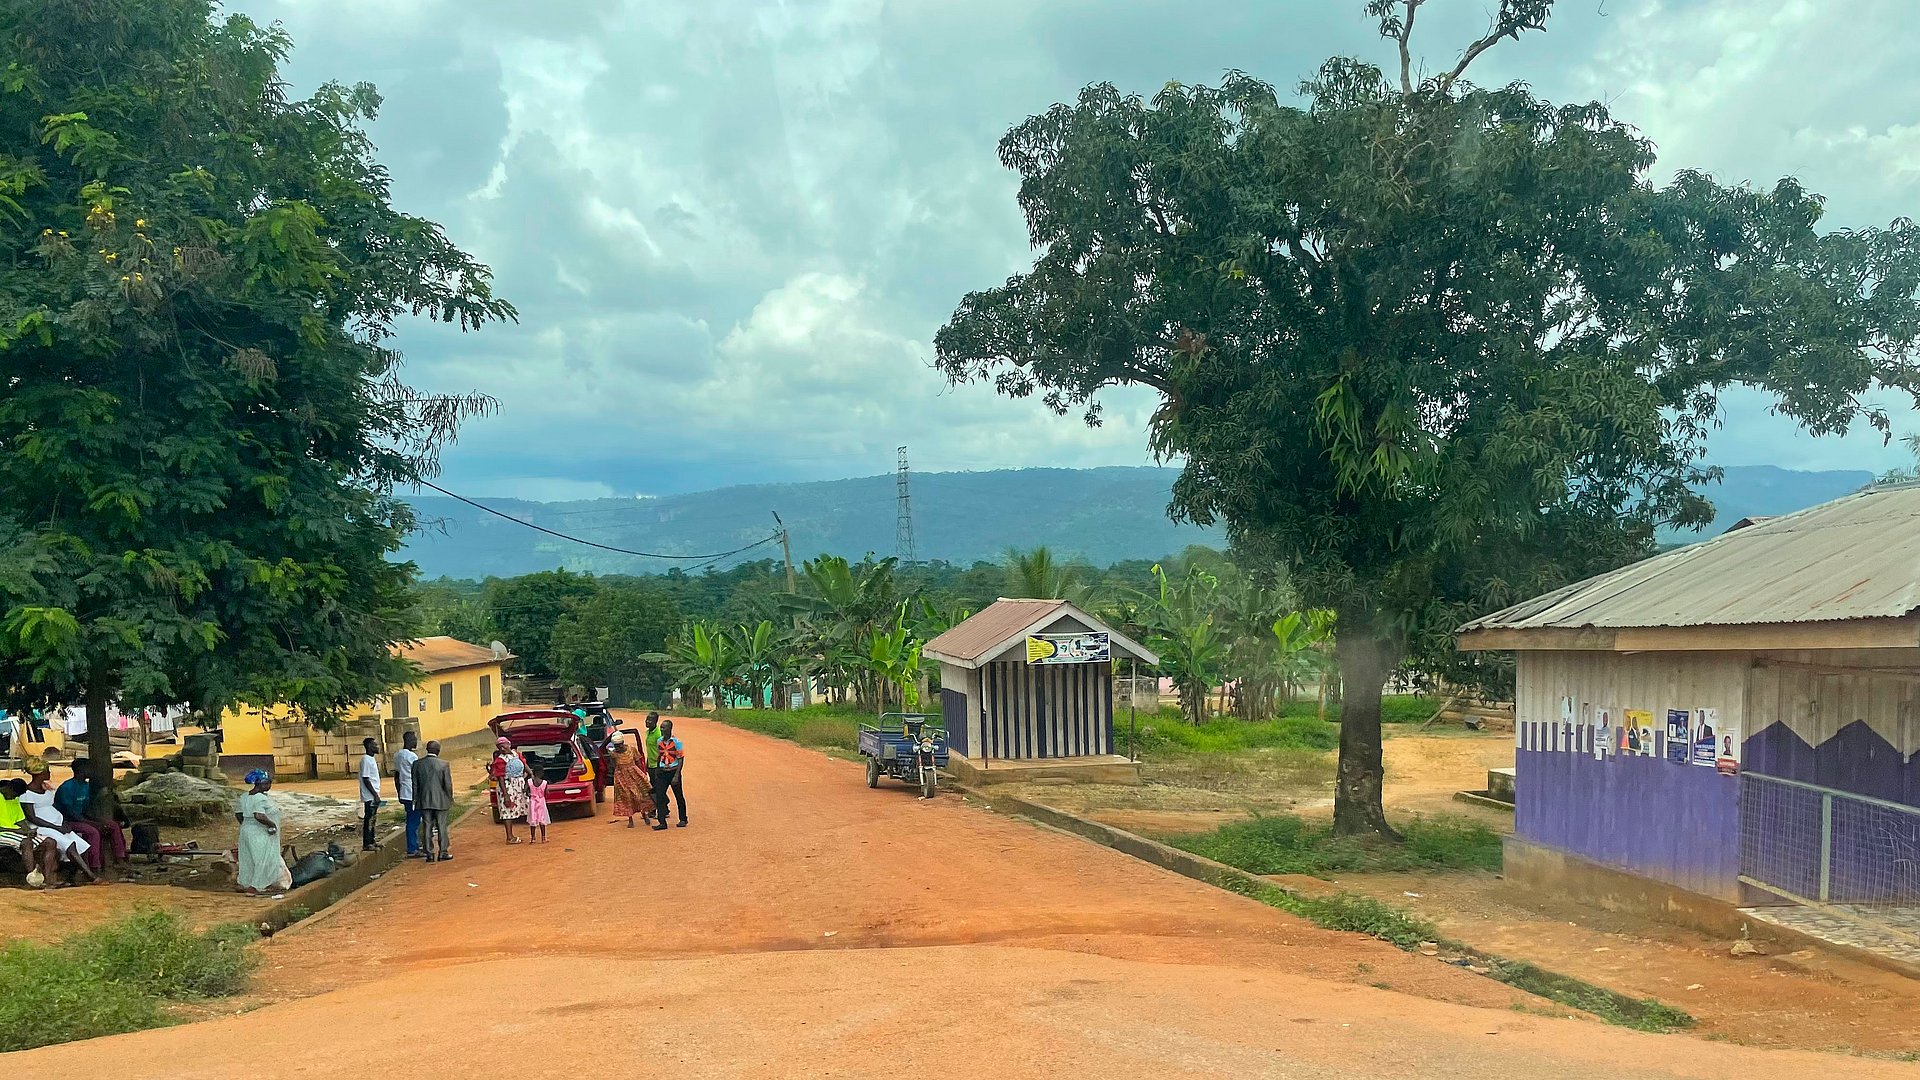 A rural road in Ghana with houses and people